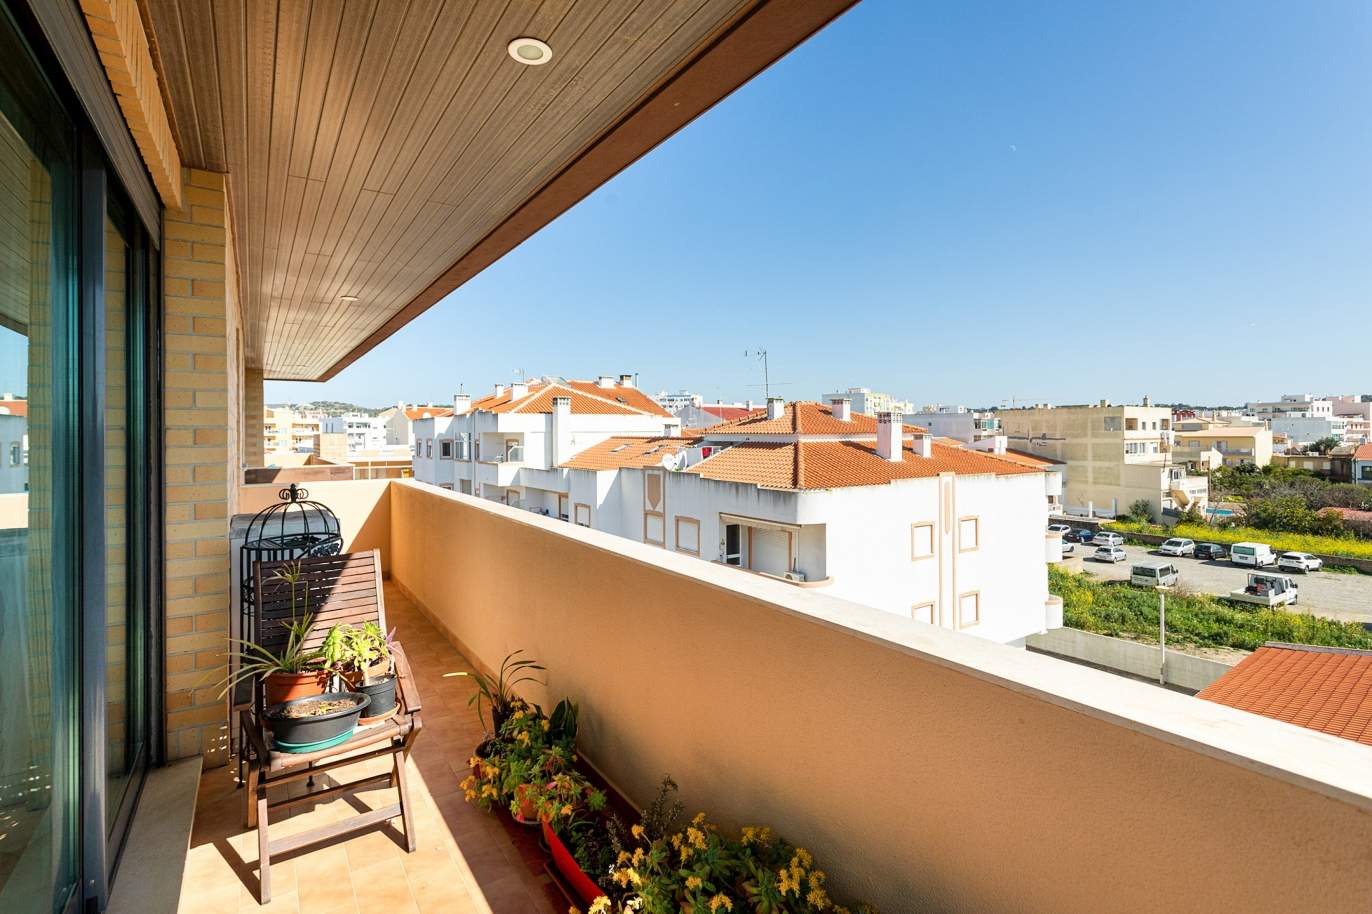 3 bedroom Penthouse, for sale, in the center of Loulé, Algarve - Portugal_192281